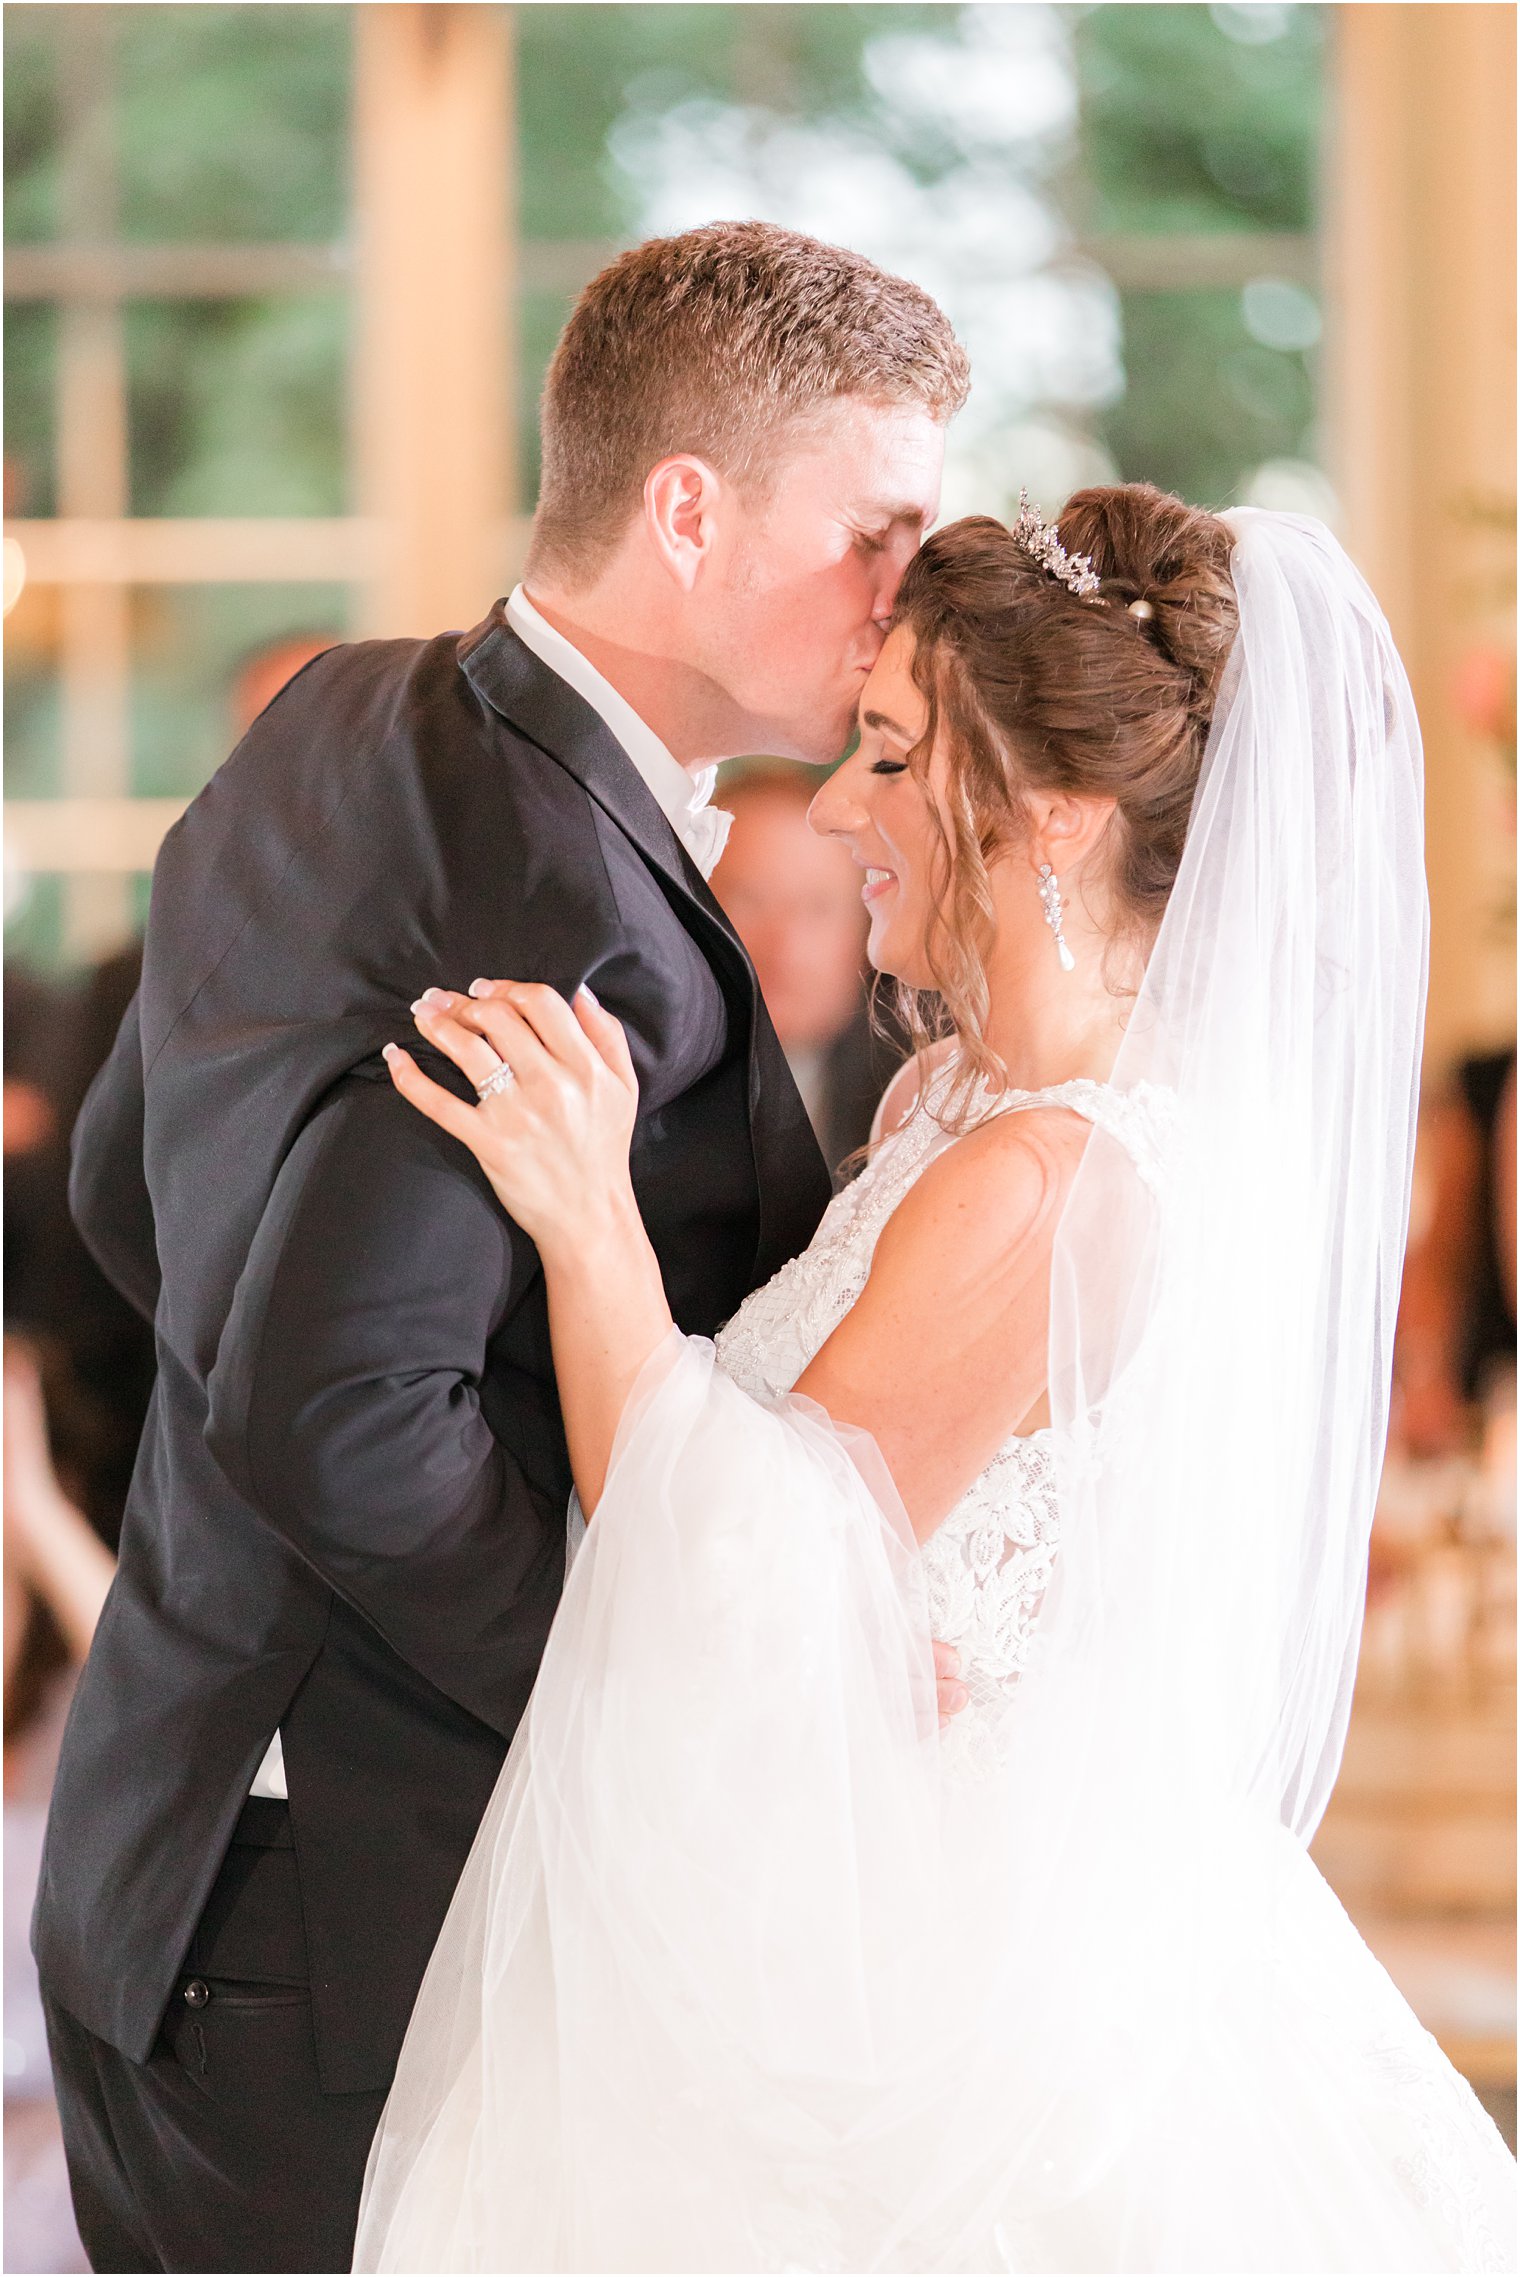 groom kisses wife during dance at Allentown NJ wedding reception